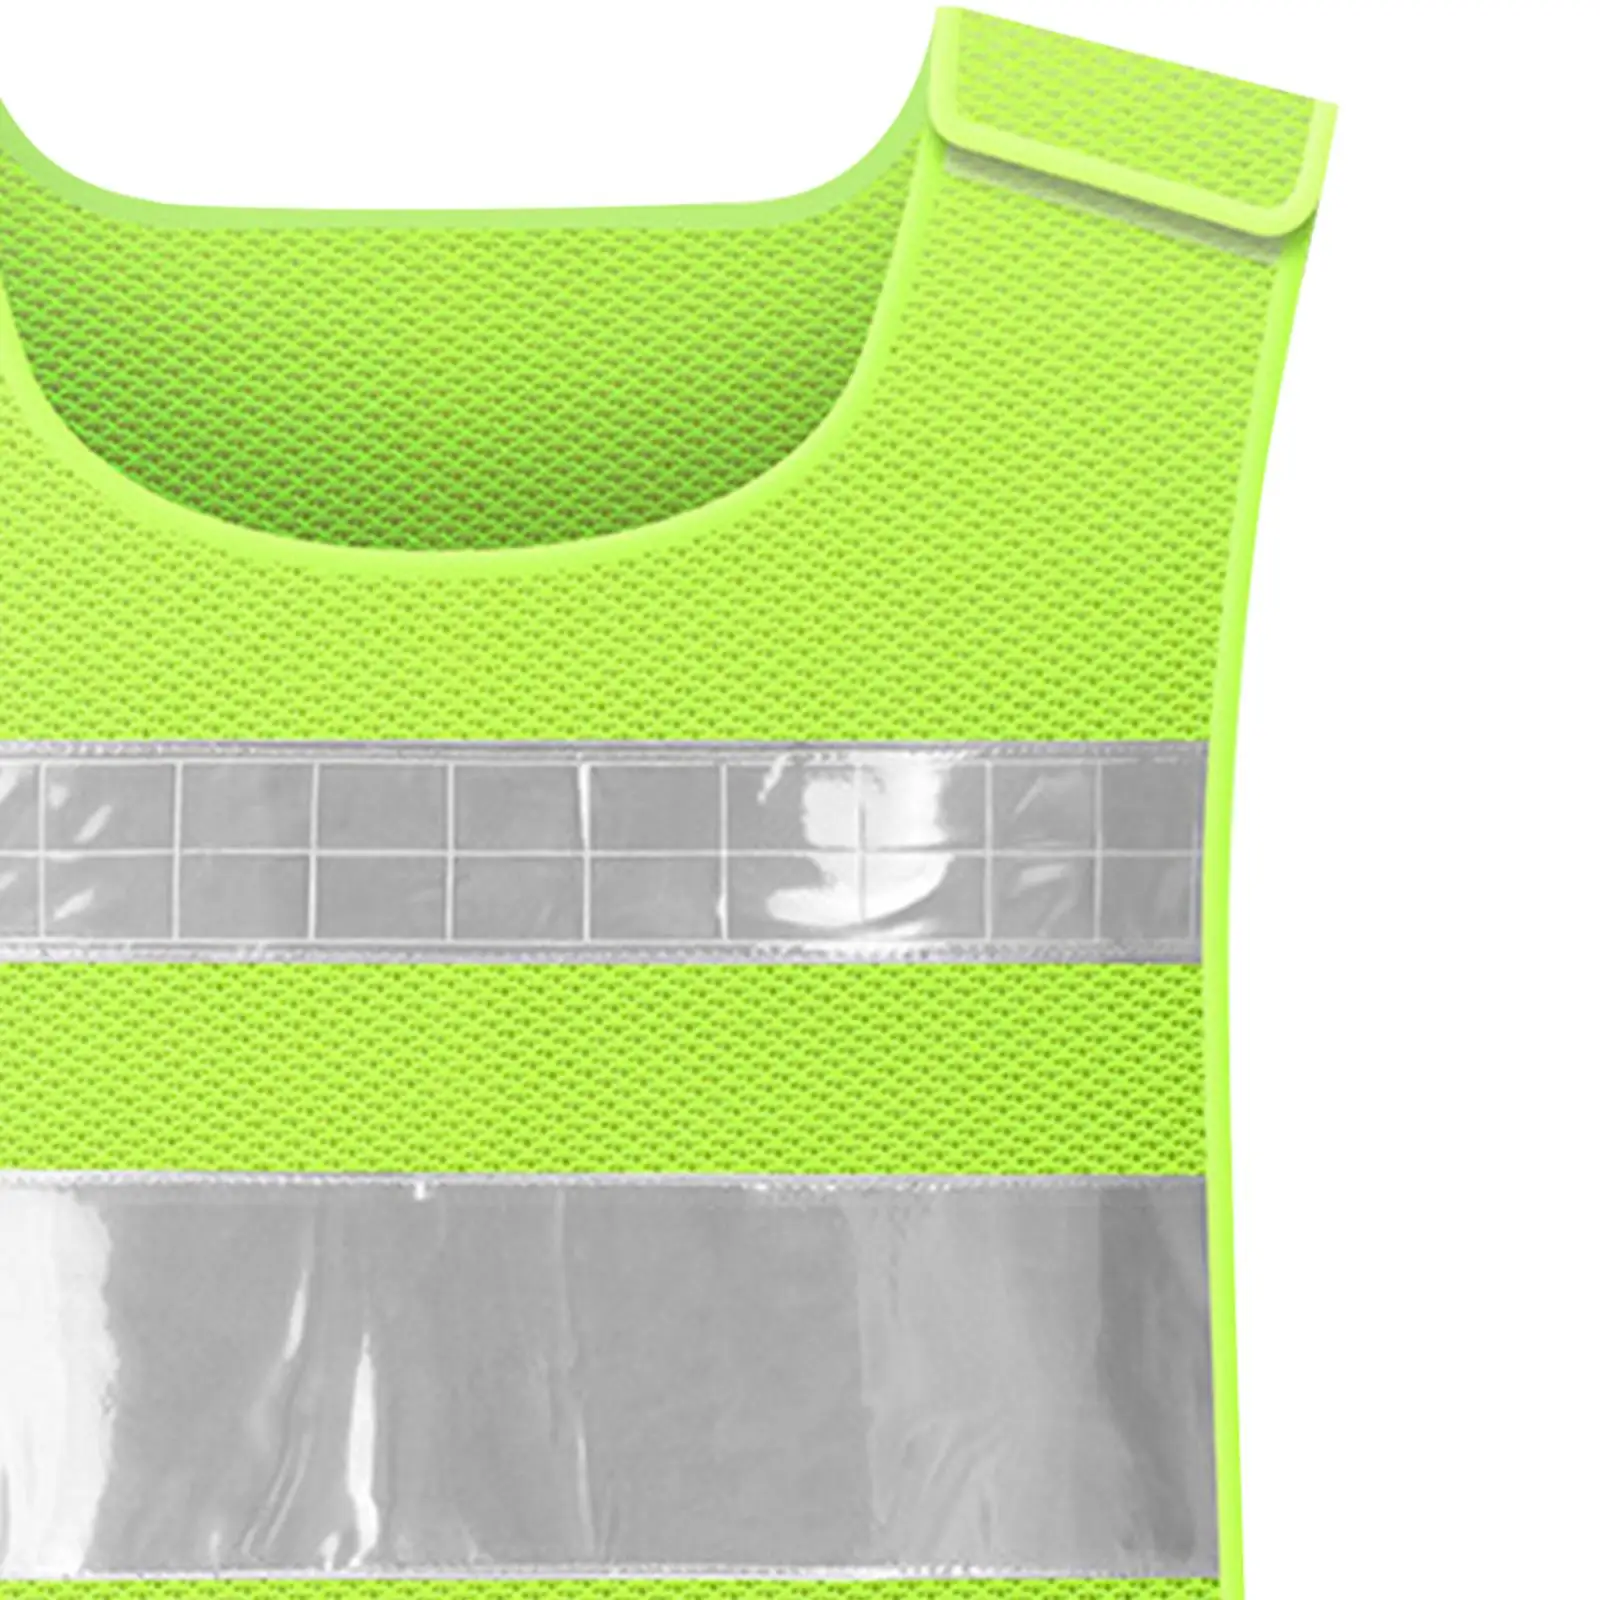 Reflective Vest High Visibility Work Construction Protector Walking Running